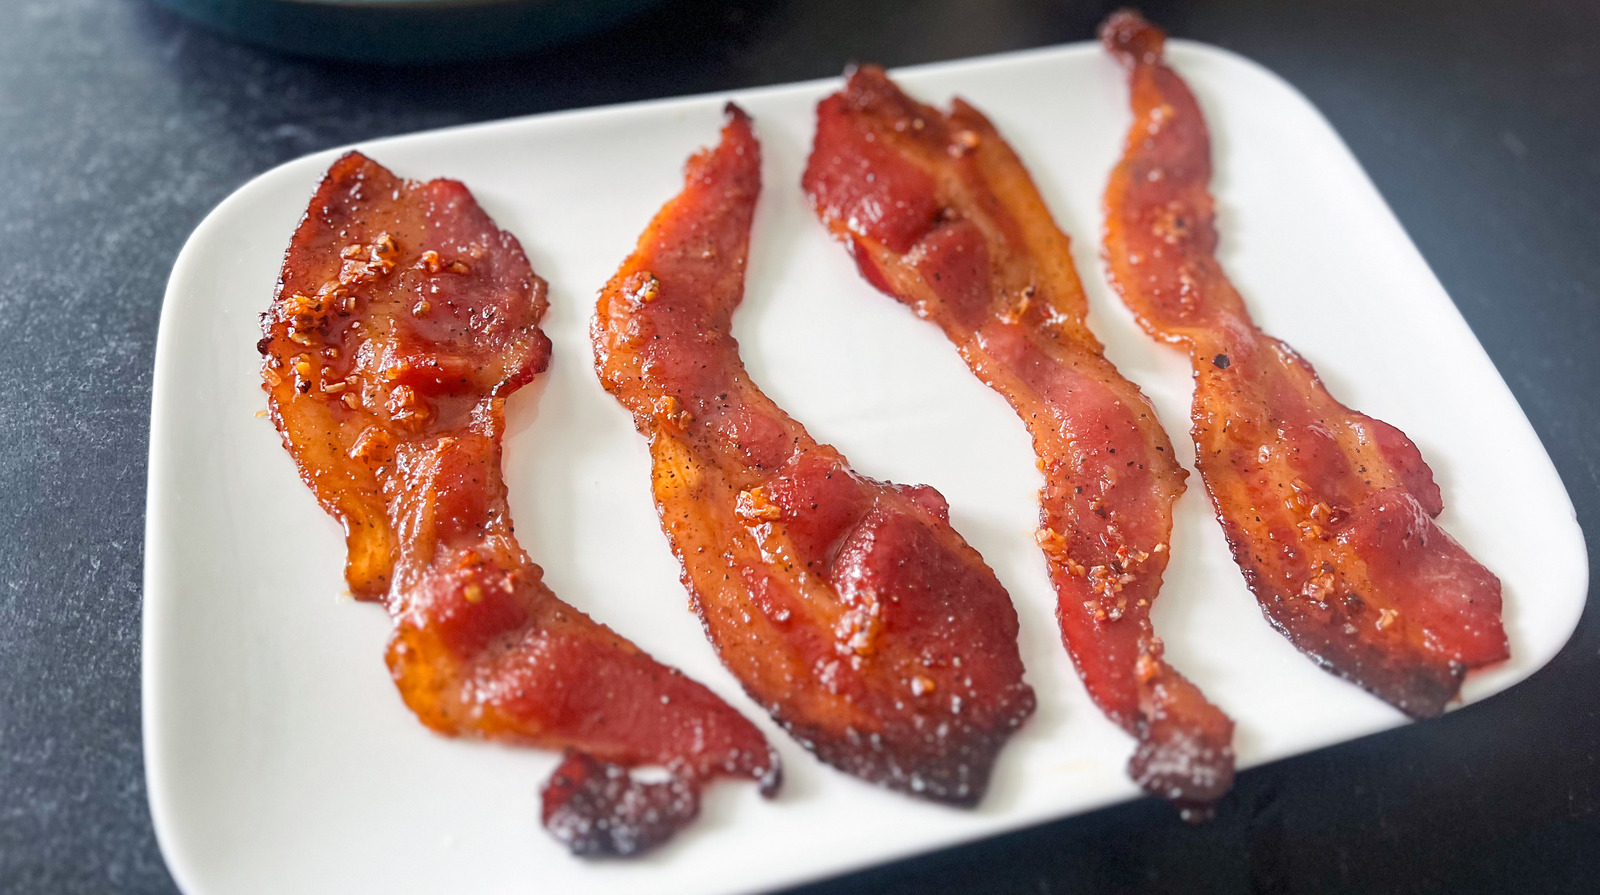 https://www.mashed.com/img/gallery/brown-sugar-oven-roasted-bacon-recipe/l-intro-1686053909.jpg